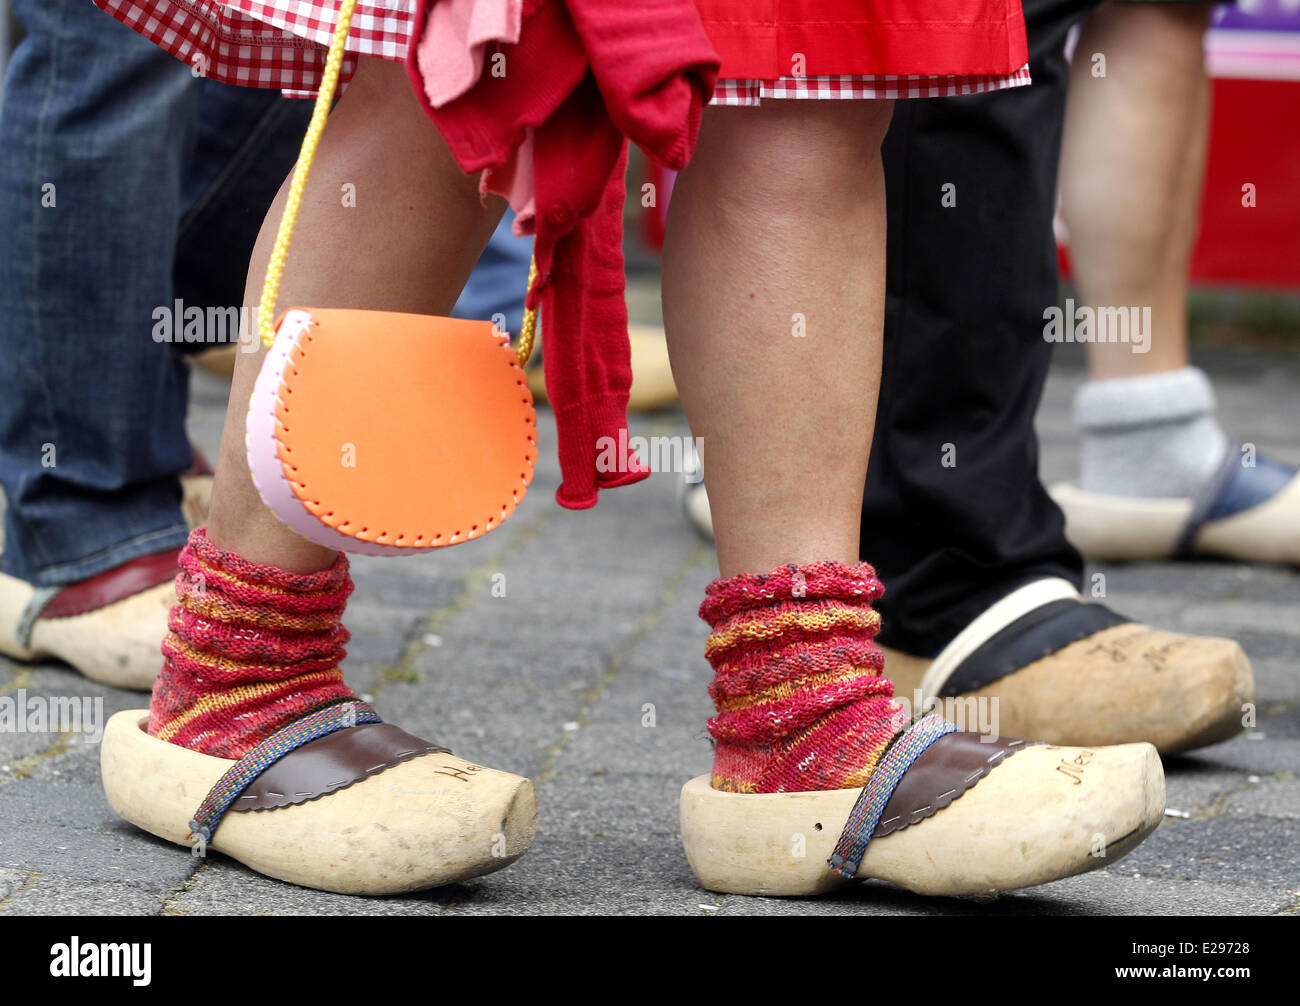 Neukirchen-Vluyn, Germany. 16th June, 2014. People walk in wooden clogs for  the 'Klompen Ball' in Neukirchen-Vluyn, Germany, 16 June 2014. Klompen is  the Dutch word for clogs. Soft woods are suitable for